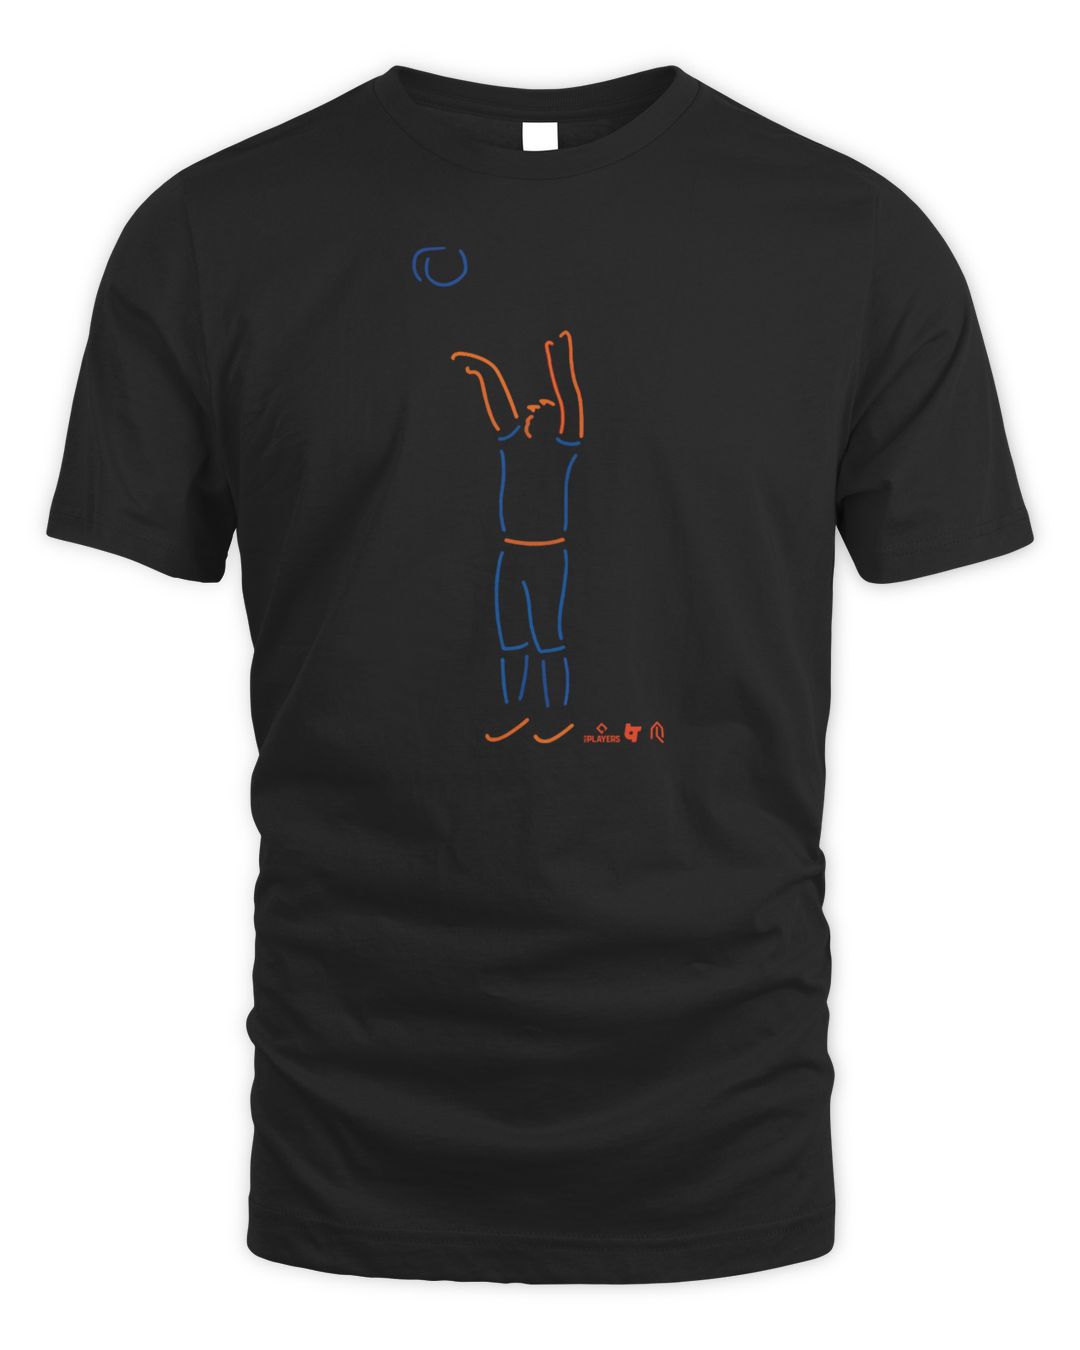 Pete Alonso the Neon Jumper Shirt